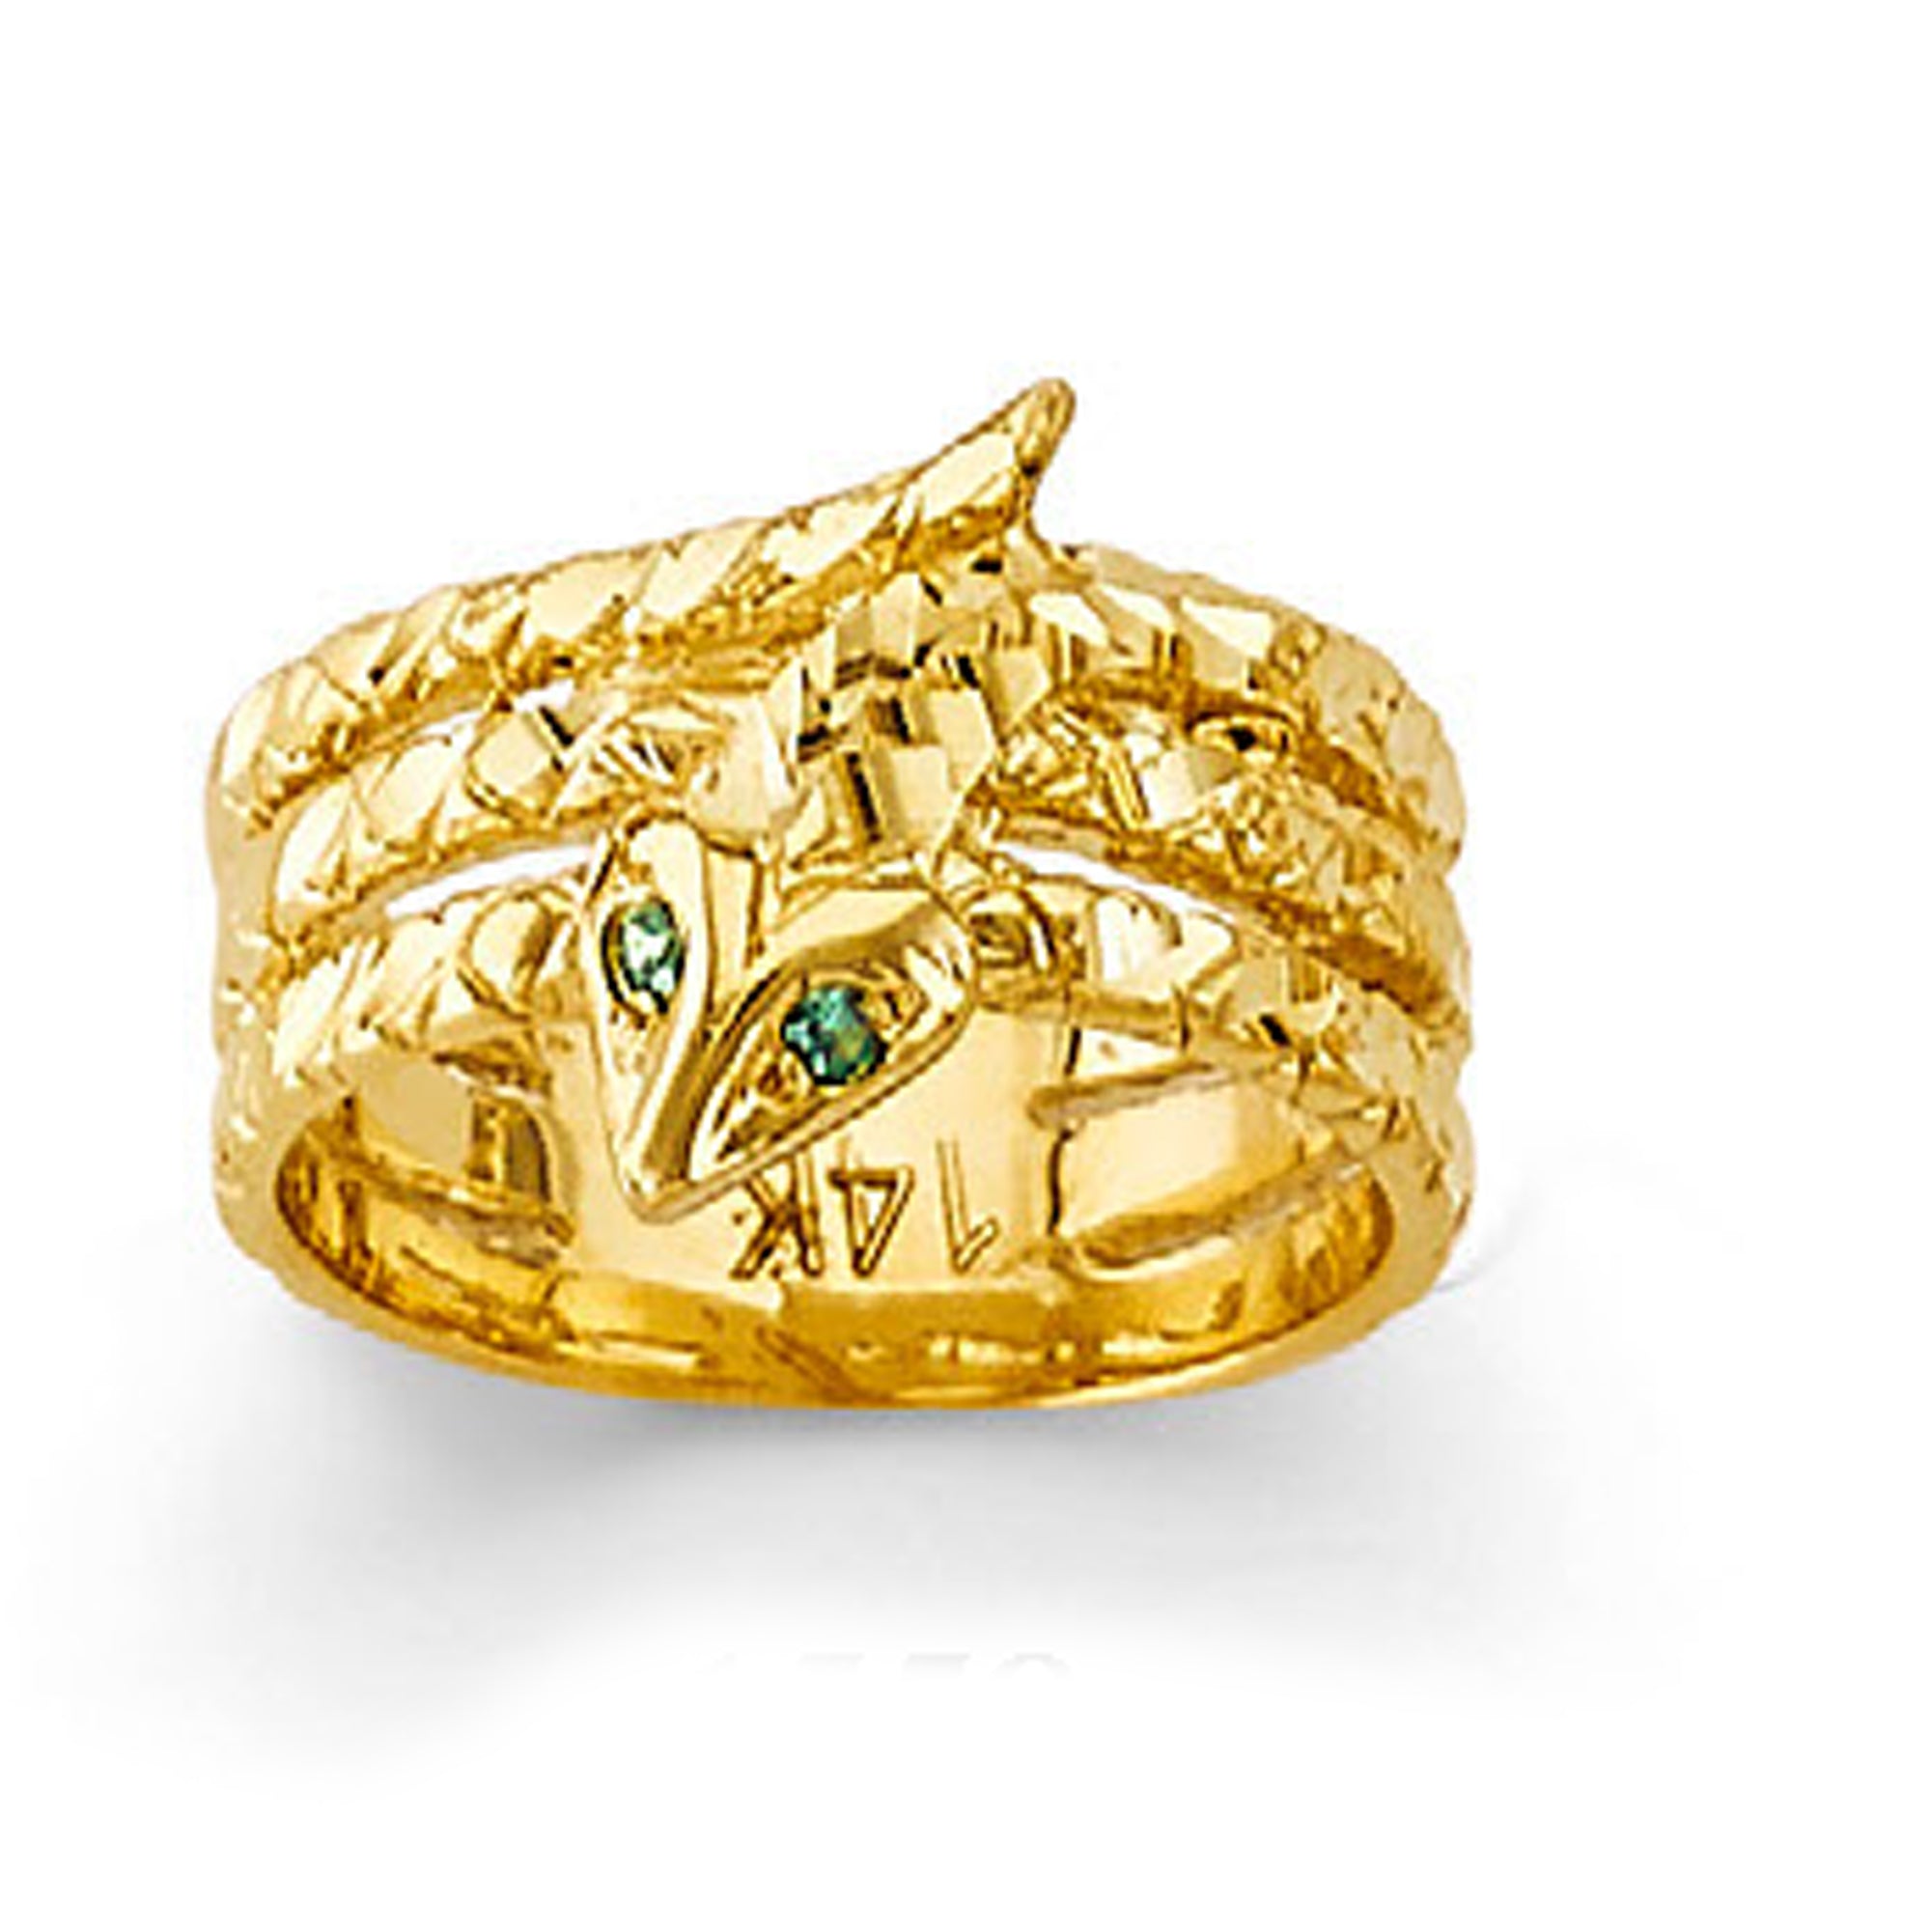 Emerald-eyed Serpent Ring in Solid Gold 